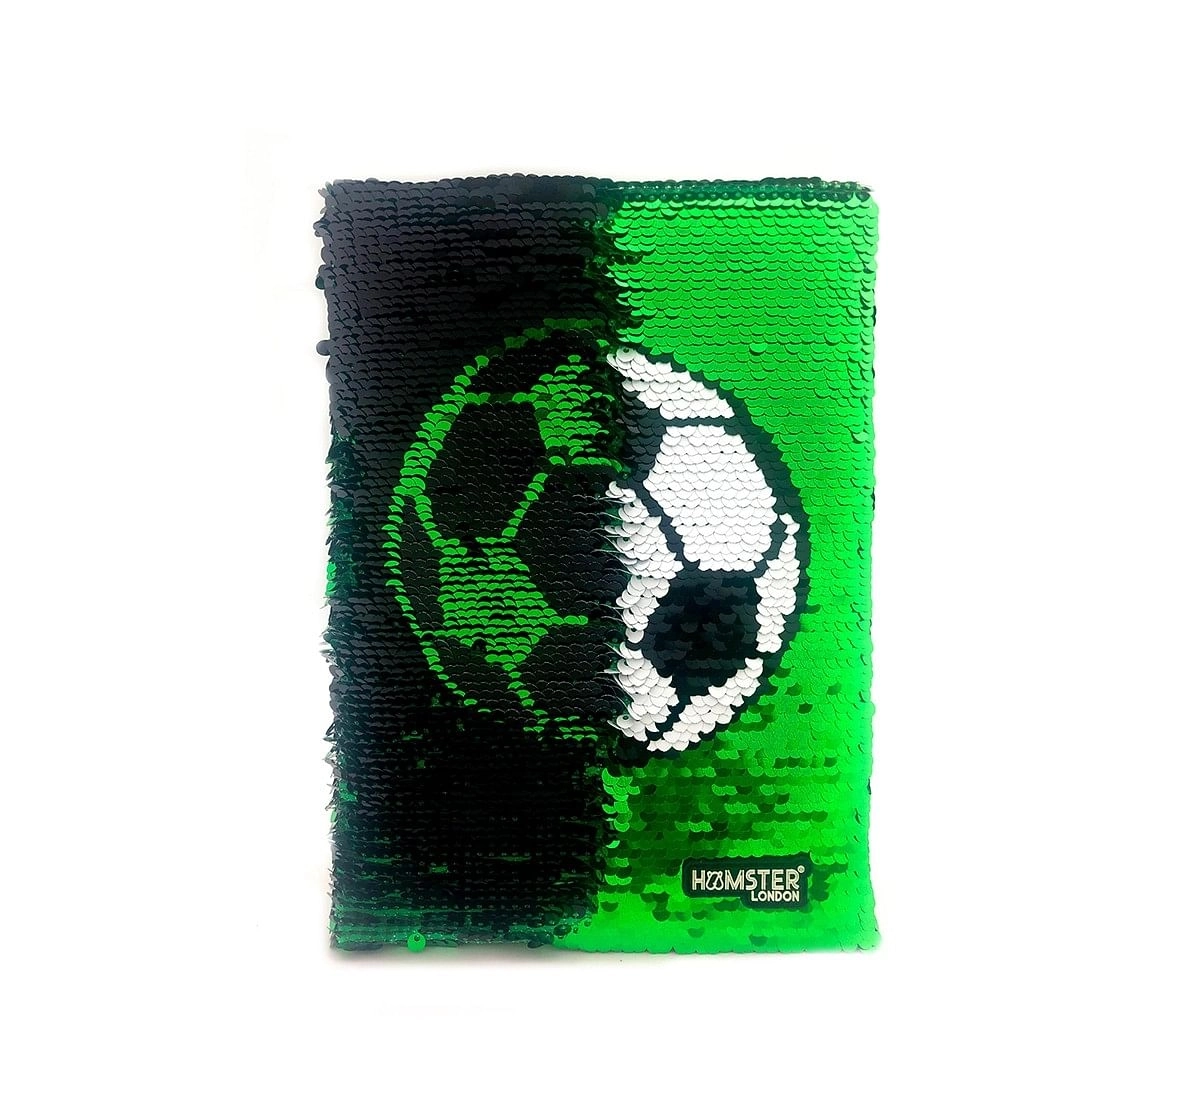 Hamster London Sequin Football Diary for Kids age 3Y+ (Green) 